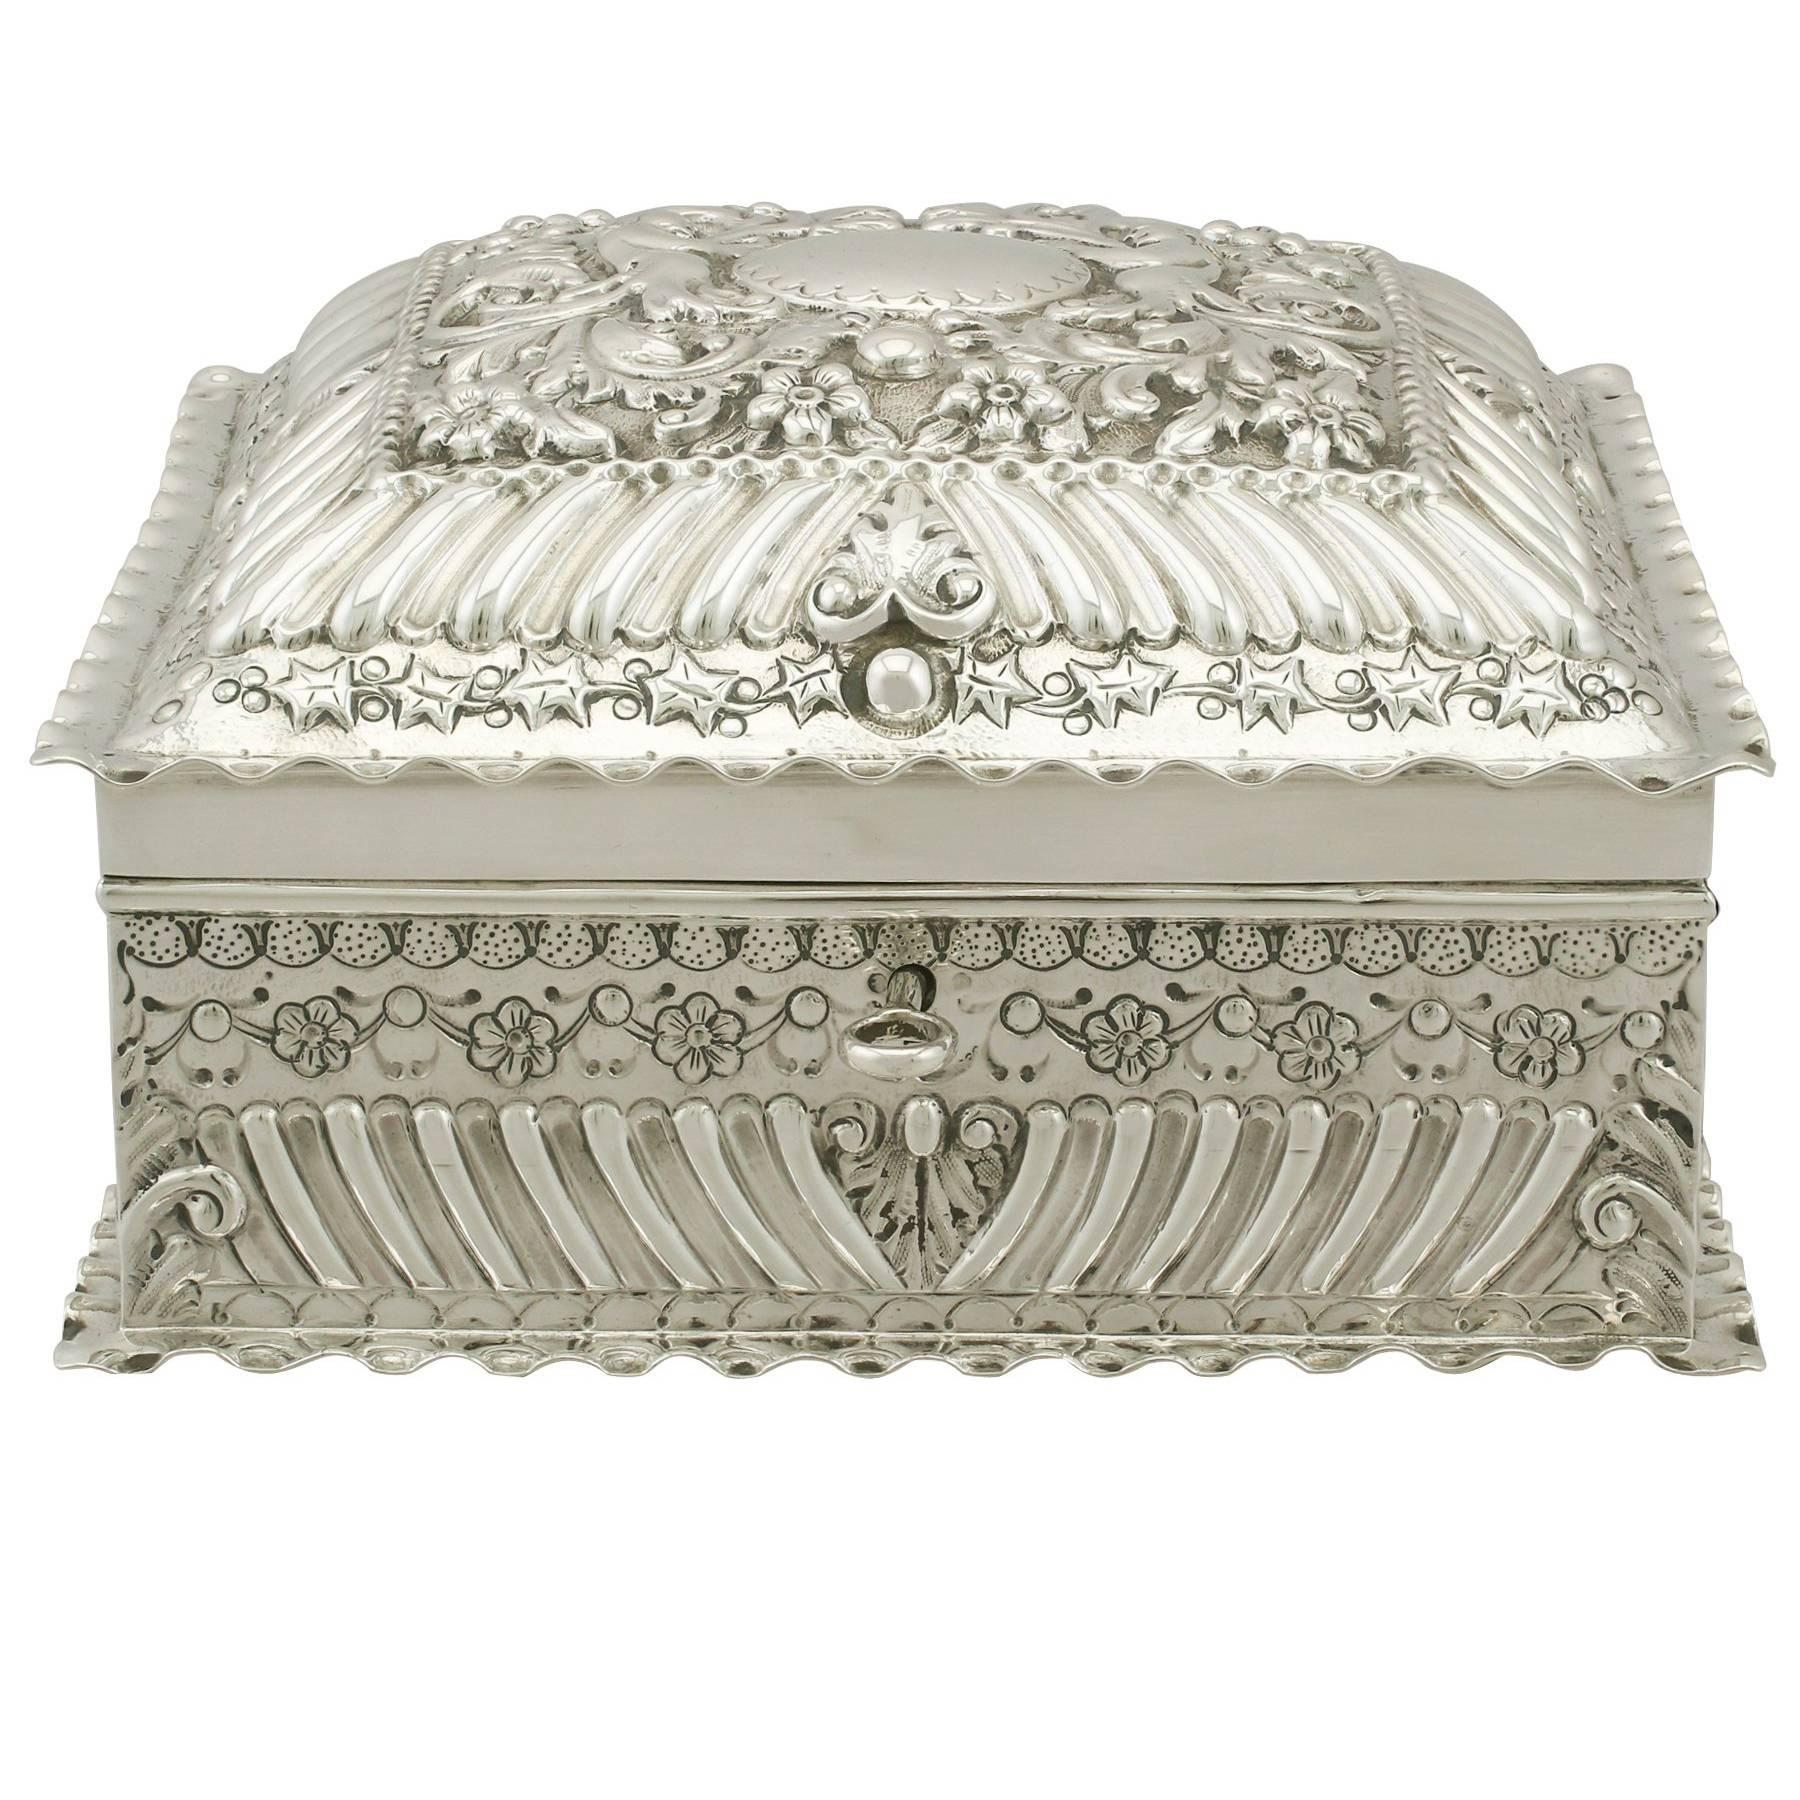 1890s Antique Victorian Sterling Silver Jewelry Box by Charles Edwards